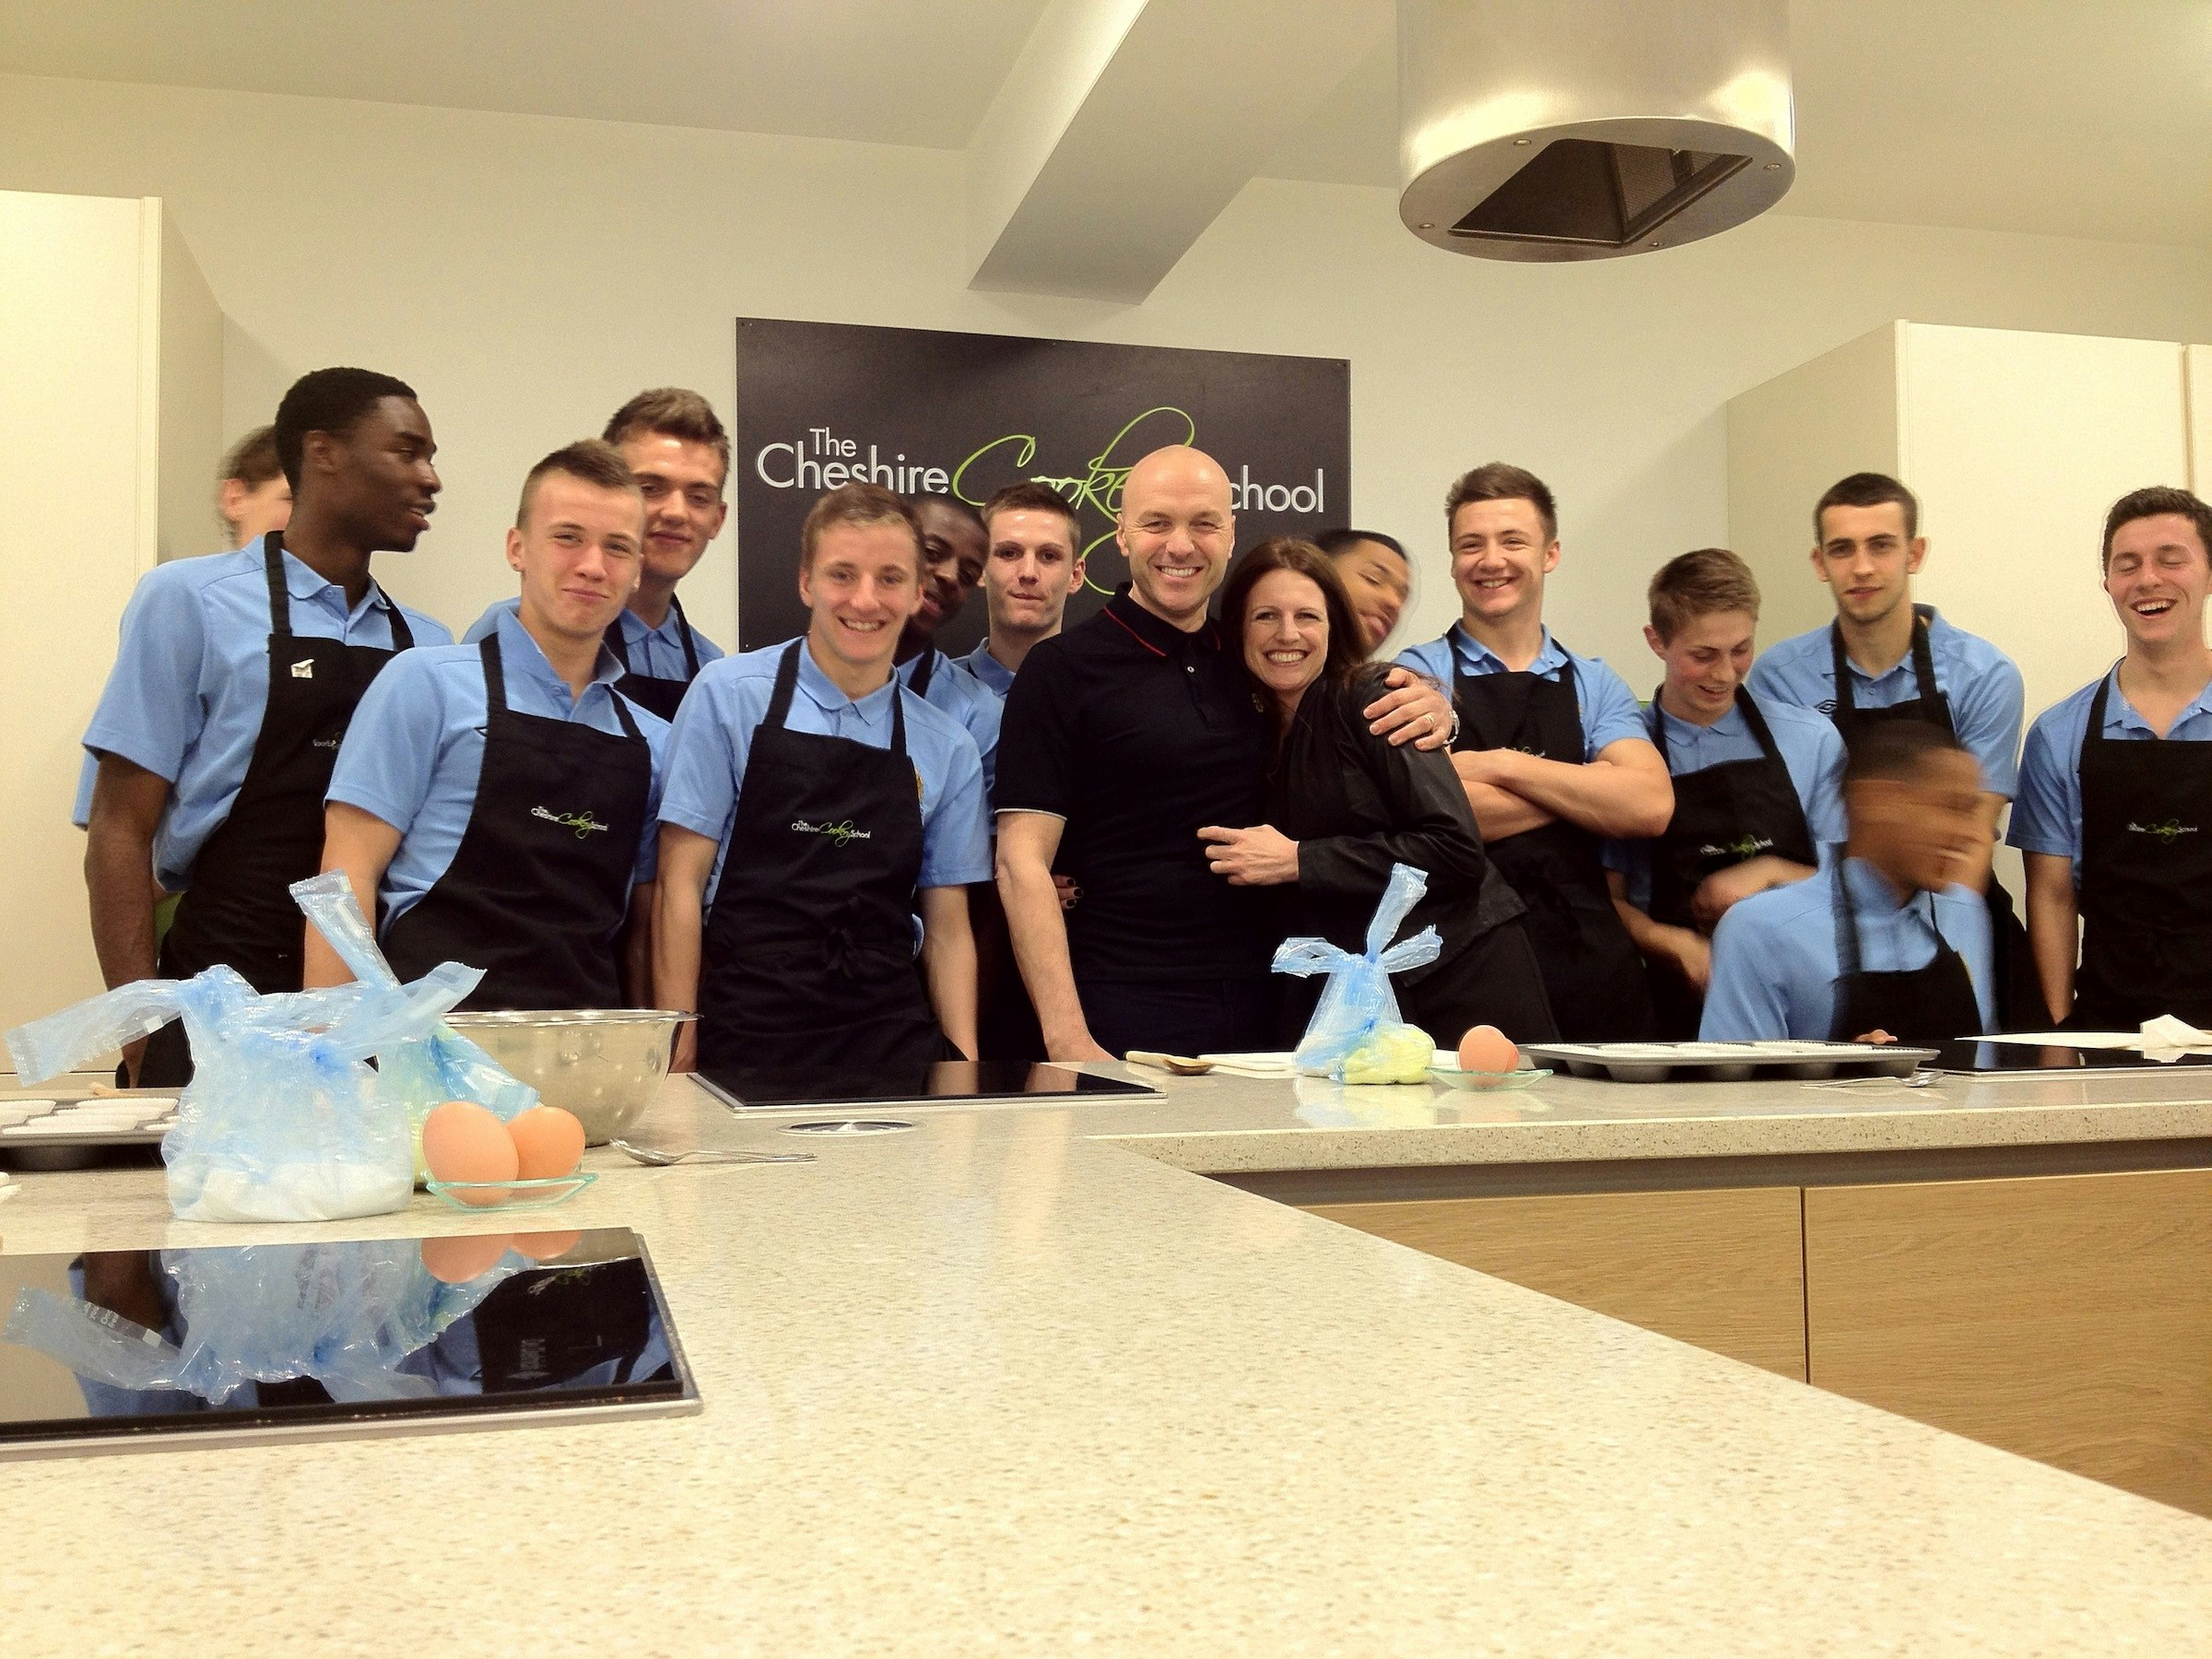 The Cheshire Cookery School  - The Cookery School  image 4